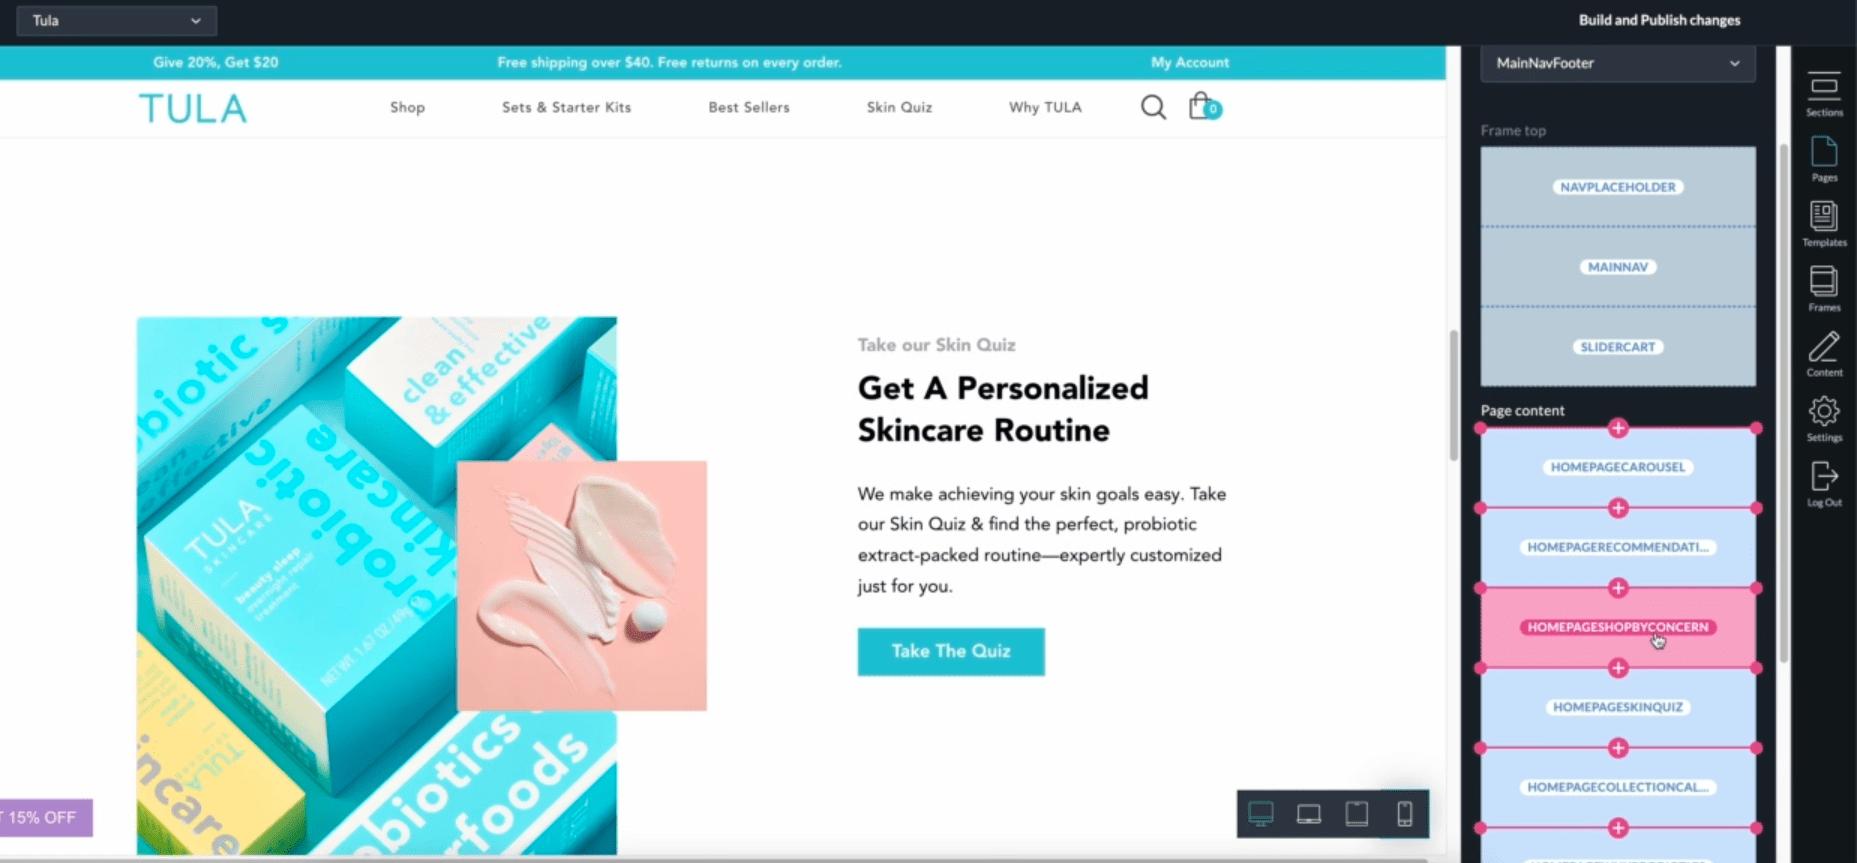 TULA Skincare Shogun Frontend Experience Manager headless commerce benefits